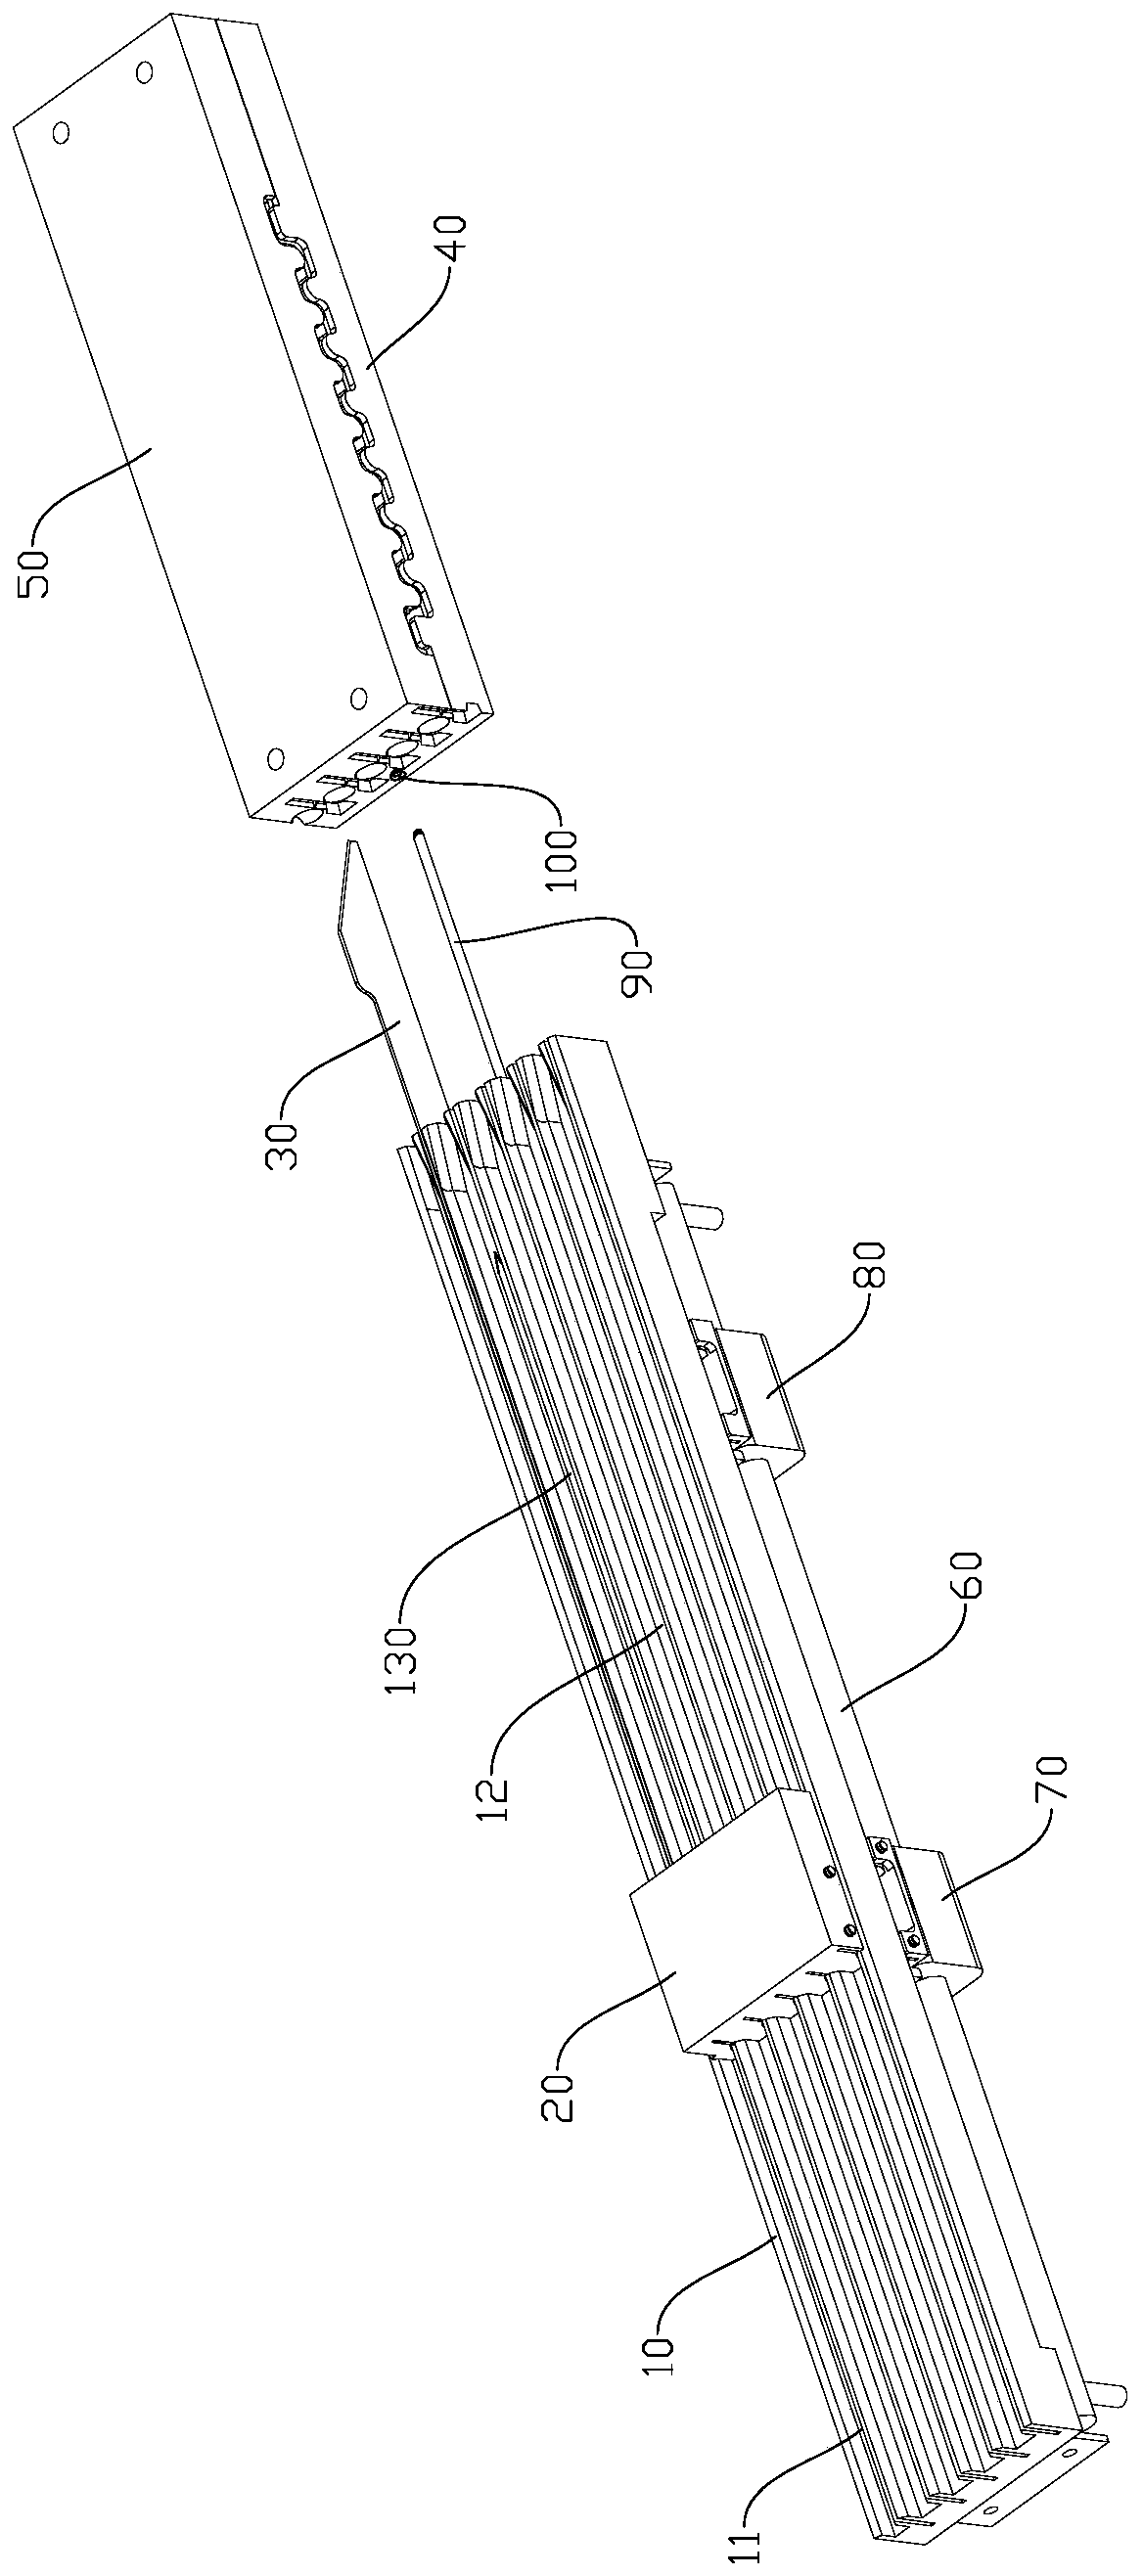 Multifunctional stringed material cutting and penetrating device